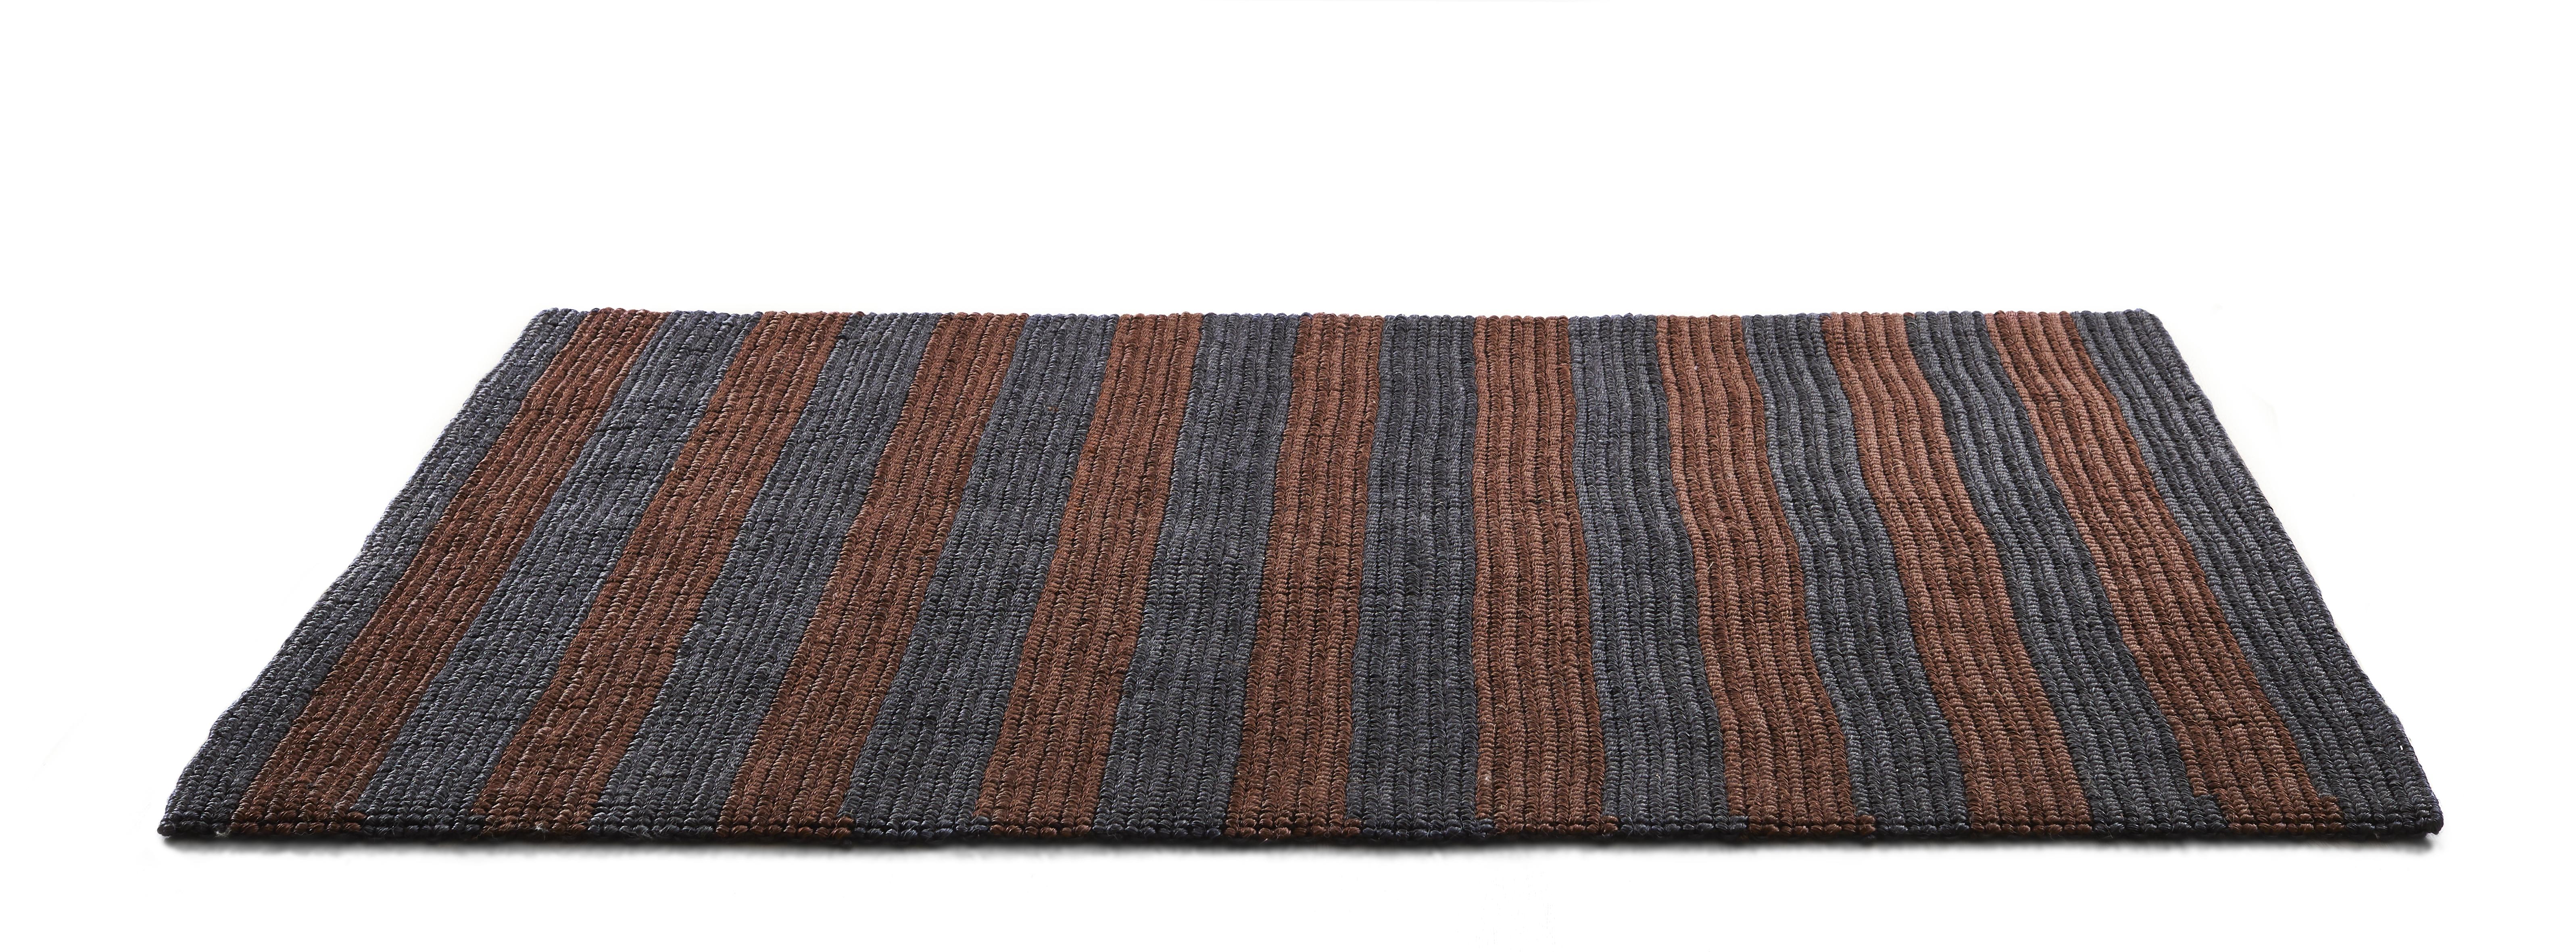 Large Par Raya rug by Sebastian Herkner
Materials: Fibres from Jipi palm leaves fibres. 
Technique: Naturally dyed fibers. Hand-woven in Colombia.
Dimensions: W 310 x L 420 cm 
Available in colors: cbrownish purple/ rust, flax/ kurkuma, black/